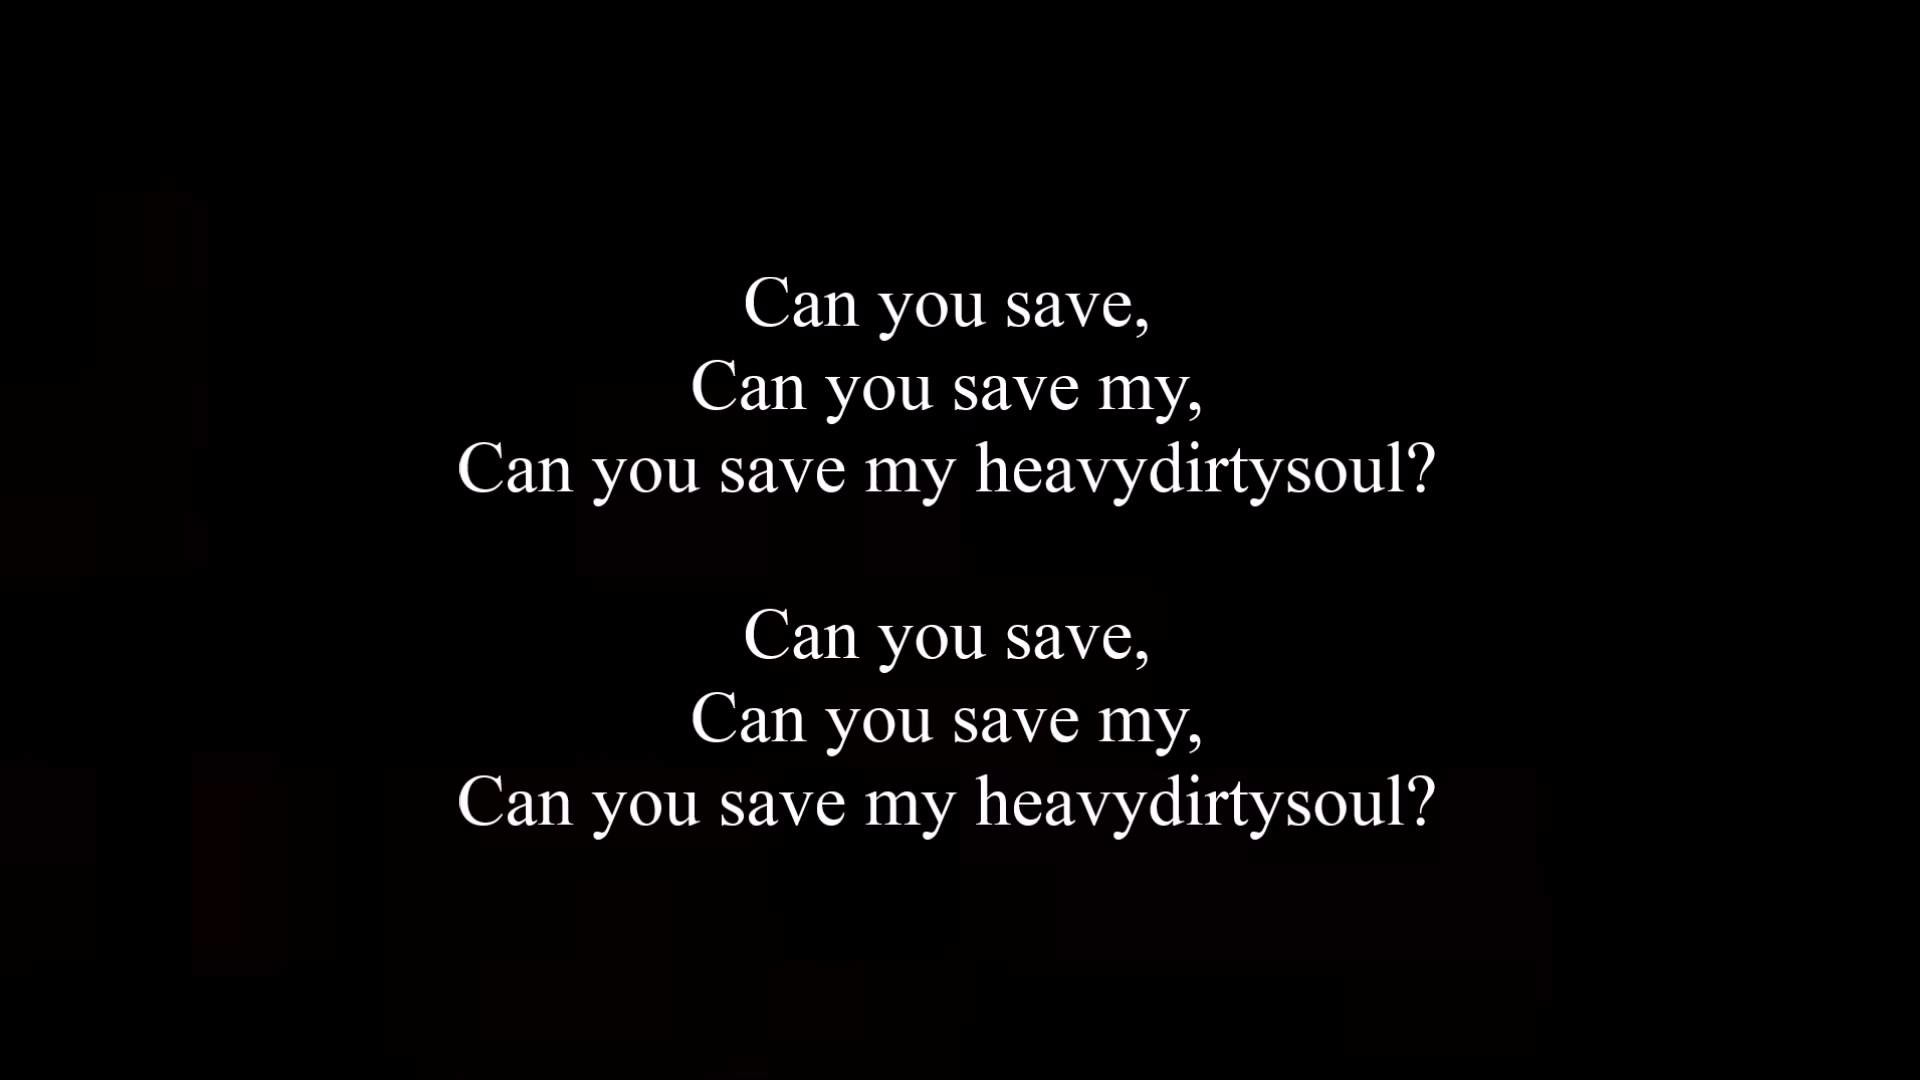 A lyric video to the song Heavydirtysoul by twenty one pilots. I do not own  this song, the band, or these lyrics.